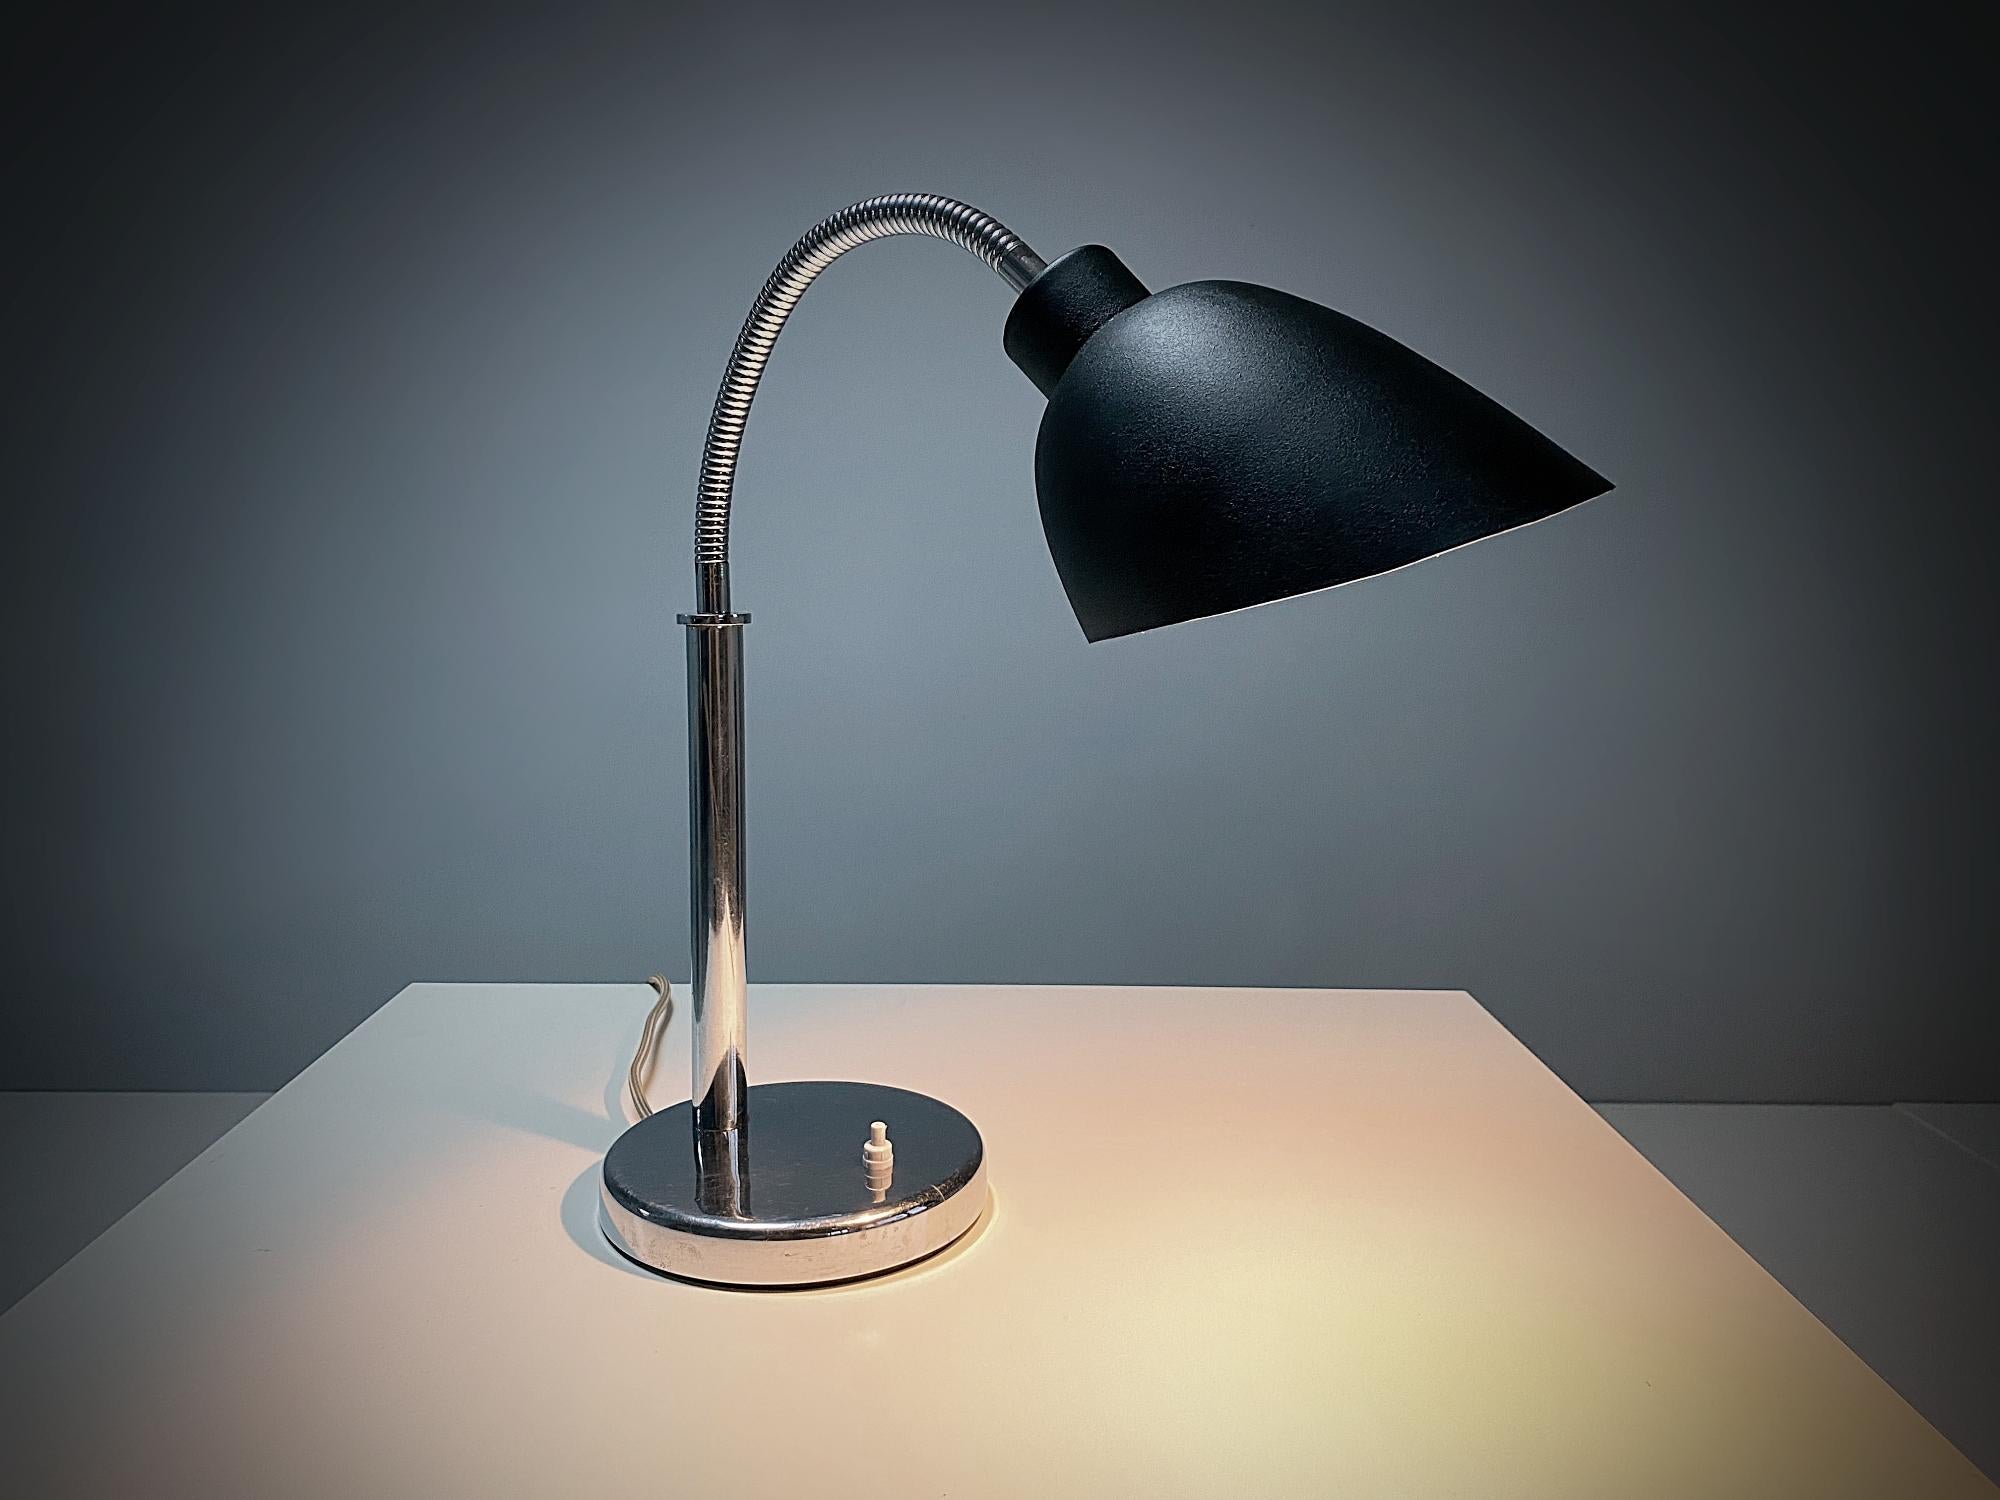 Important Arne Jacobsen AJ 8 modernist chromed and black lacquered brass/alloy table lamp manufactured in 1920s, Denmark. This is the first lamp series that Arne Jacobsen designed back in the 1920s and with its classic and elegant design, it is a